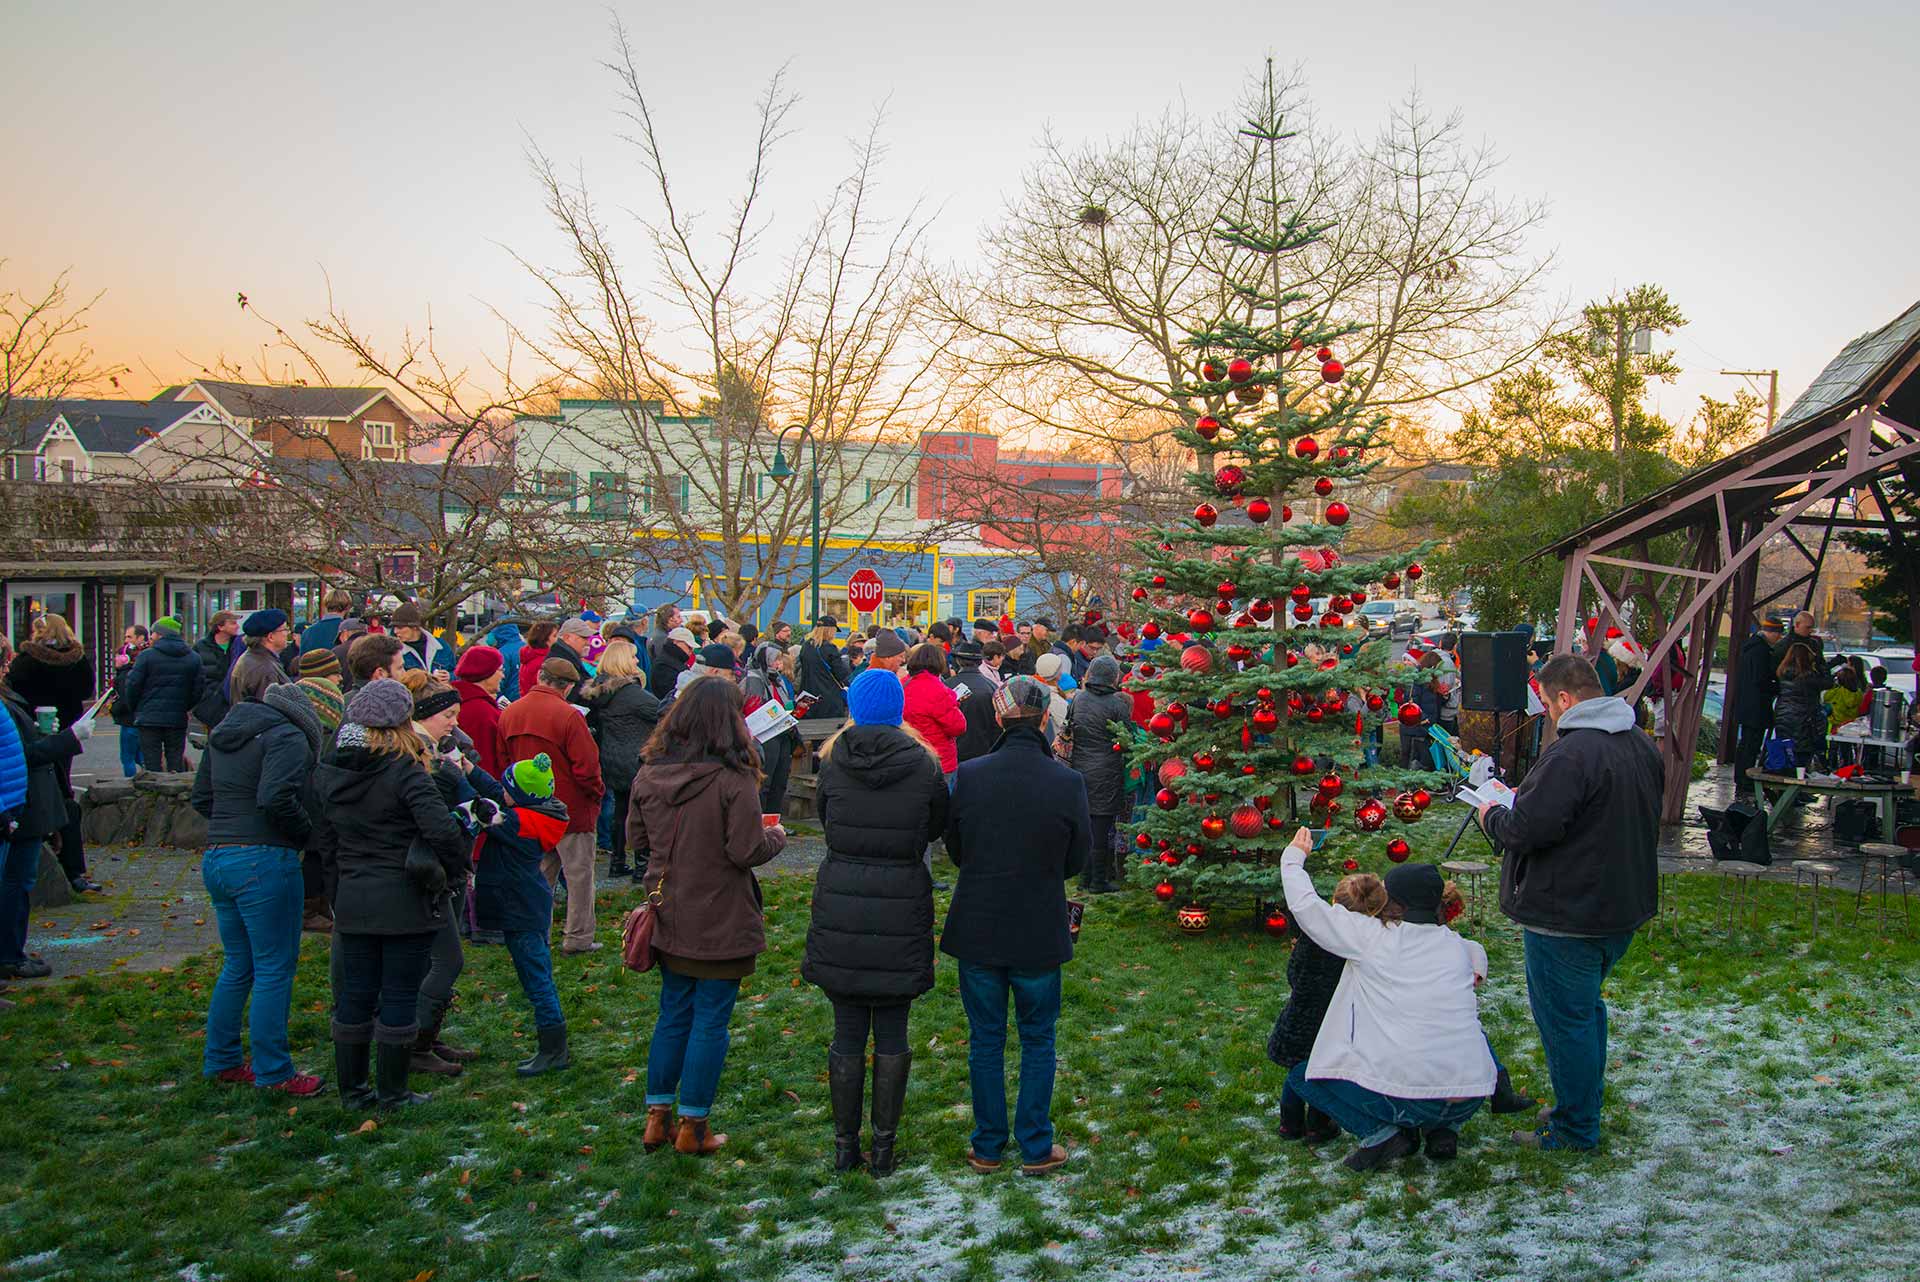 People gather in a park for carol singing and a tree lighting.